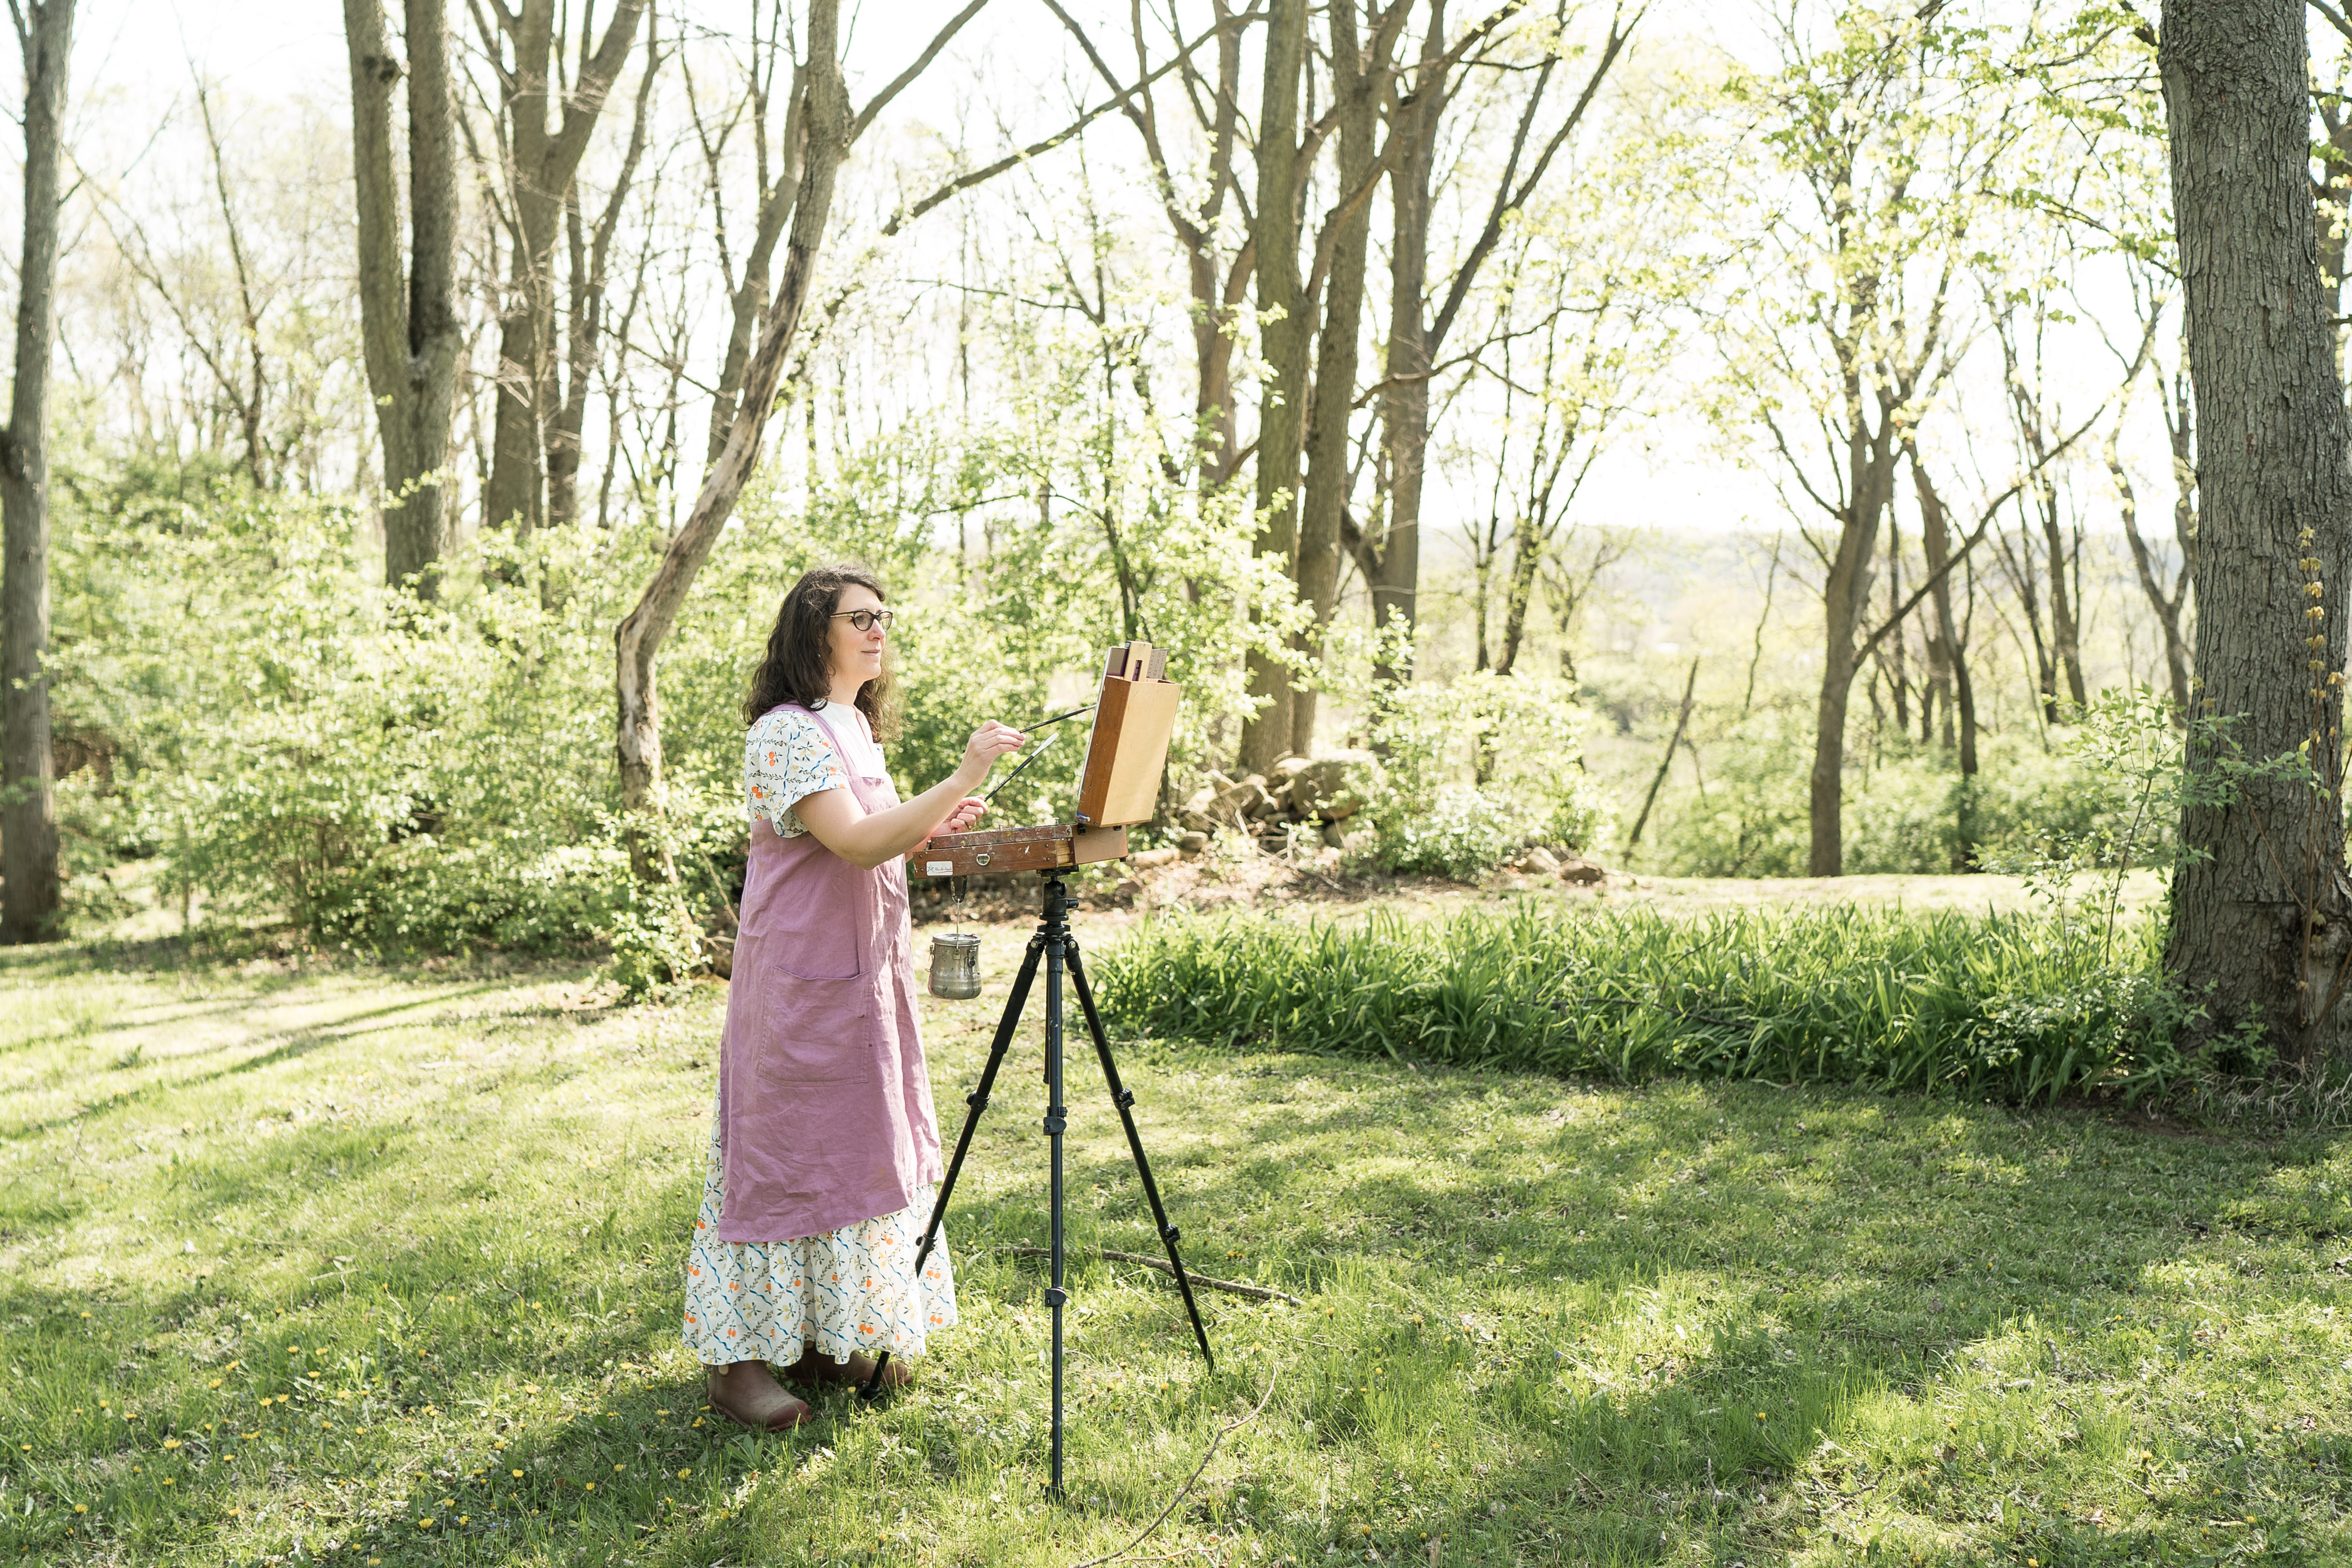 Plein air artist Bley Hack is looking forward to chatting with visitors at the upcoming Garden Gems tour. She will be painting in the gardens. COURTESY PHOTO